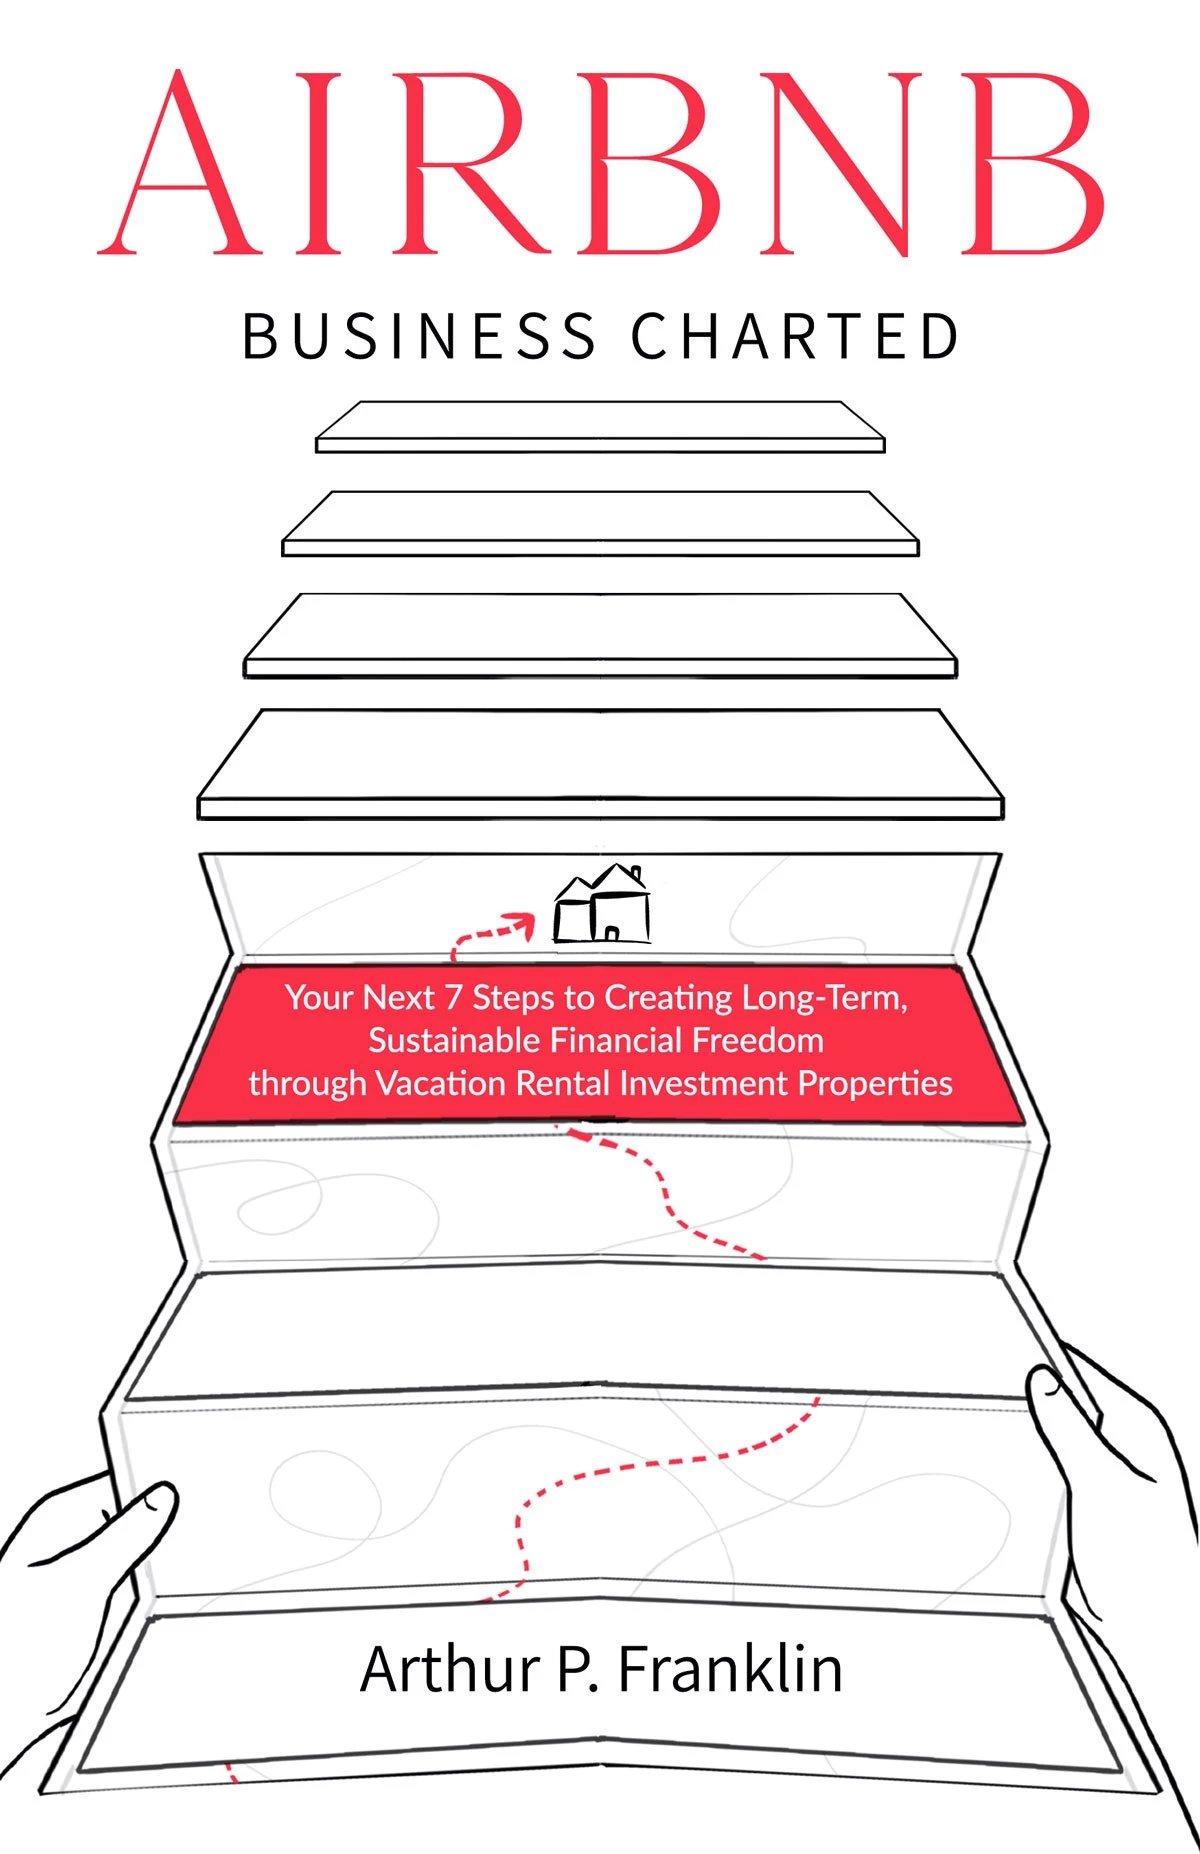 AIRBNB BUSINESS CHARTED: Your Next 7 Steps to Creating Long-Term, Sustainable Financial Freedom through Vacation Rental Investment Properties